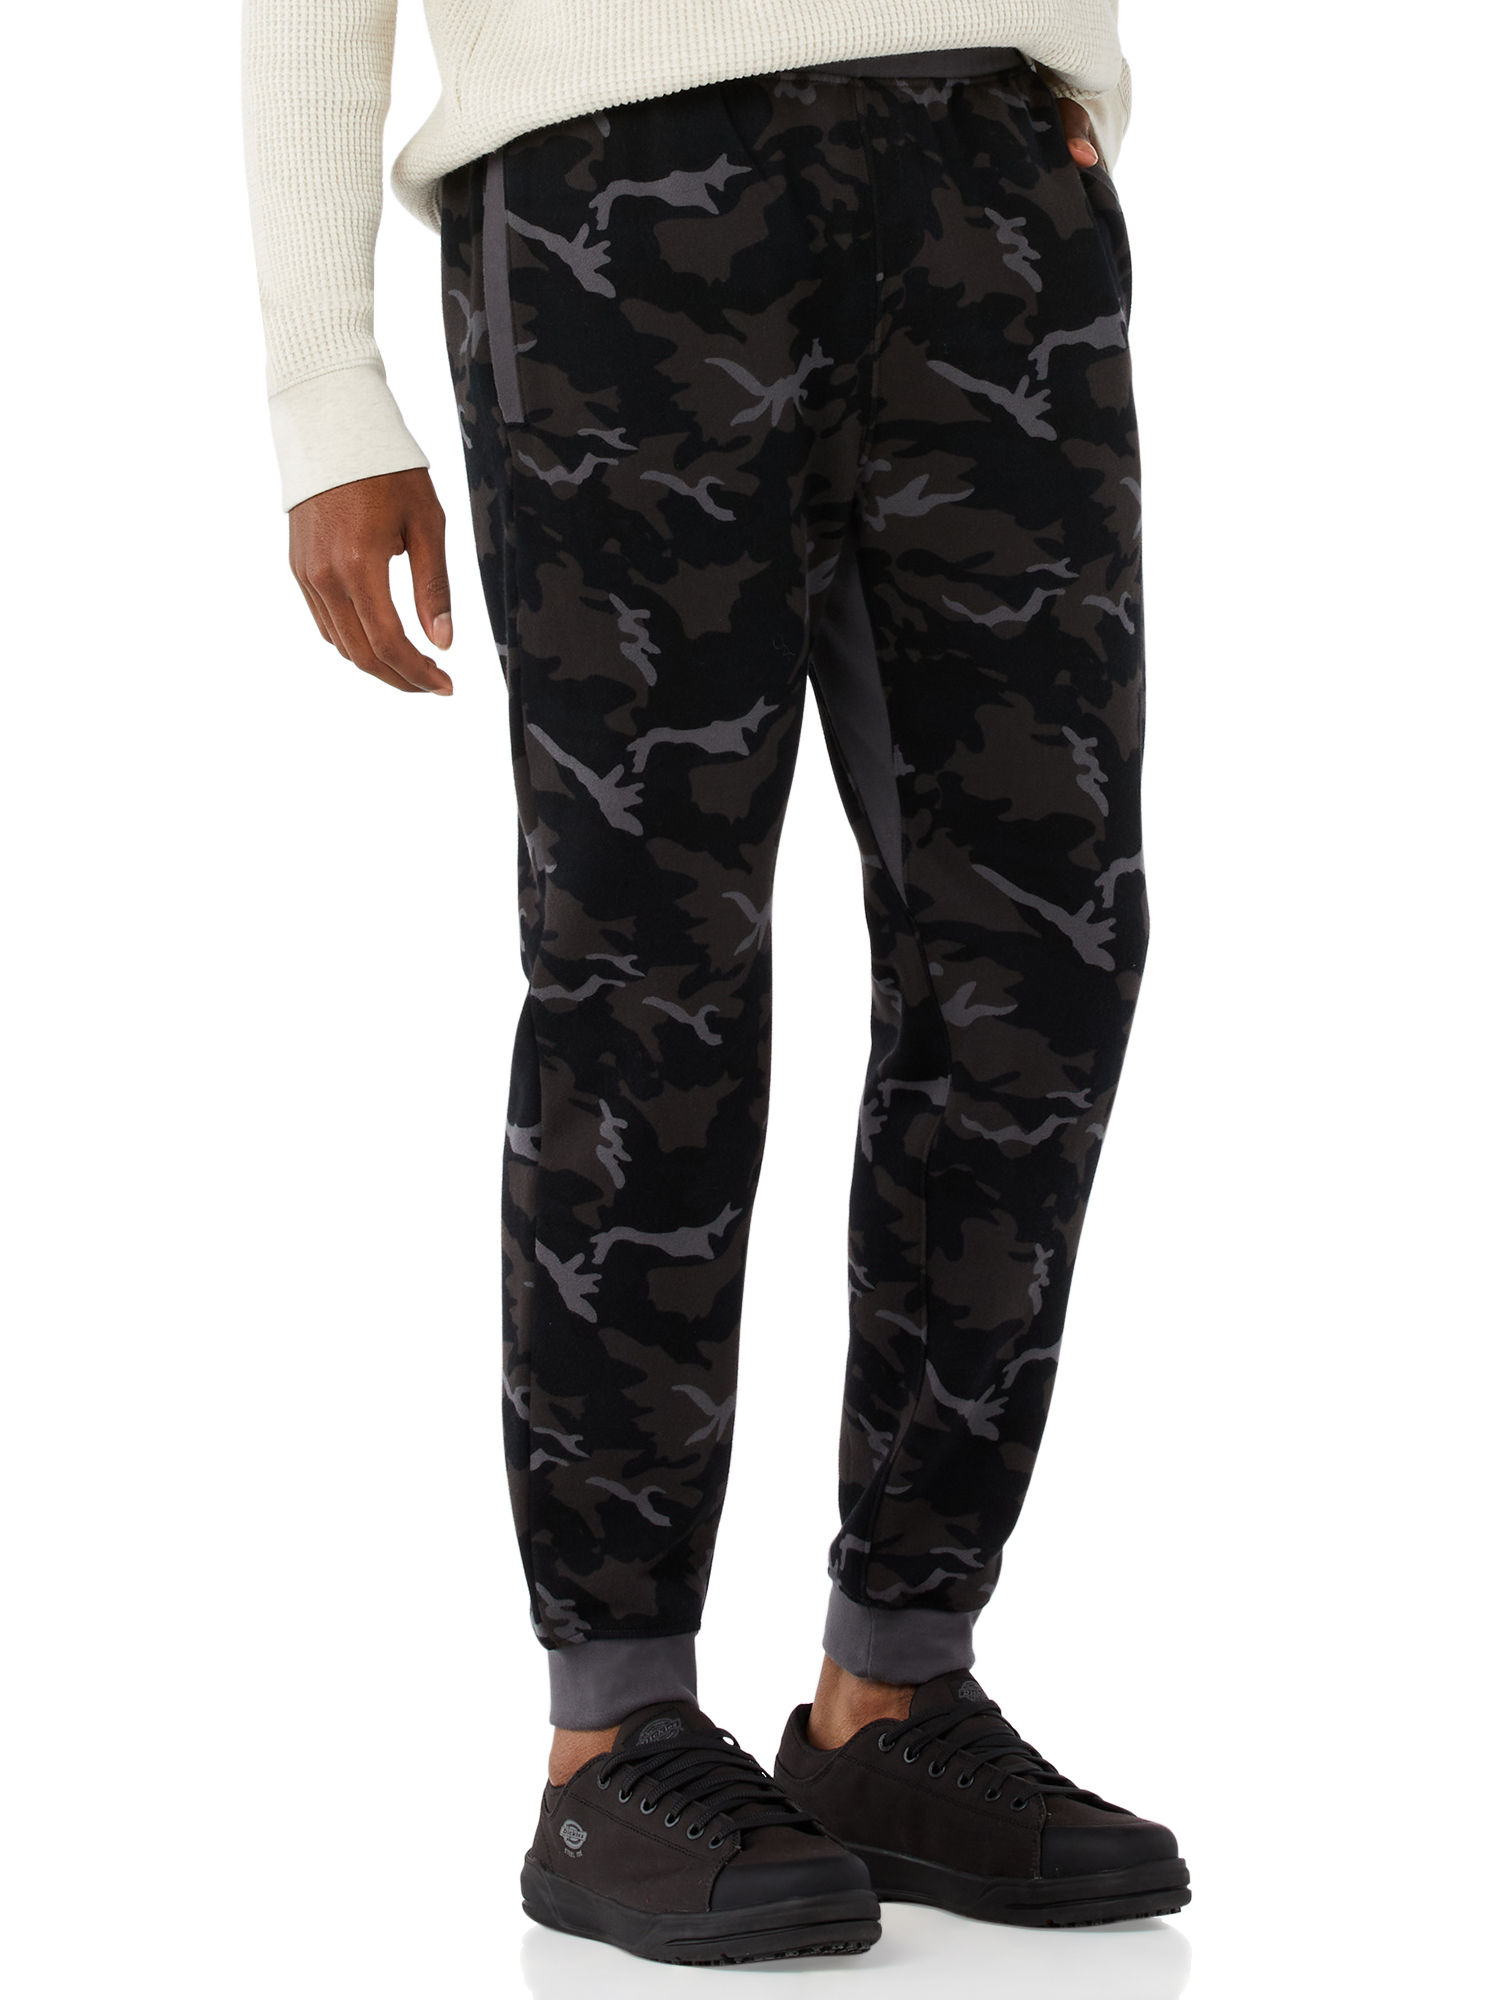 Free Assembly Men's Everyday Fleece Pant - Jogger - image 3 of 6